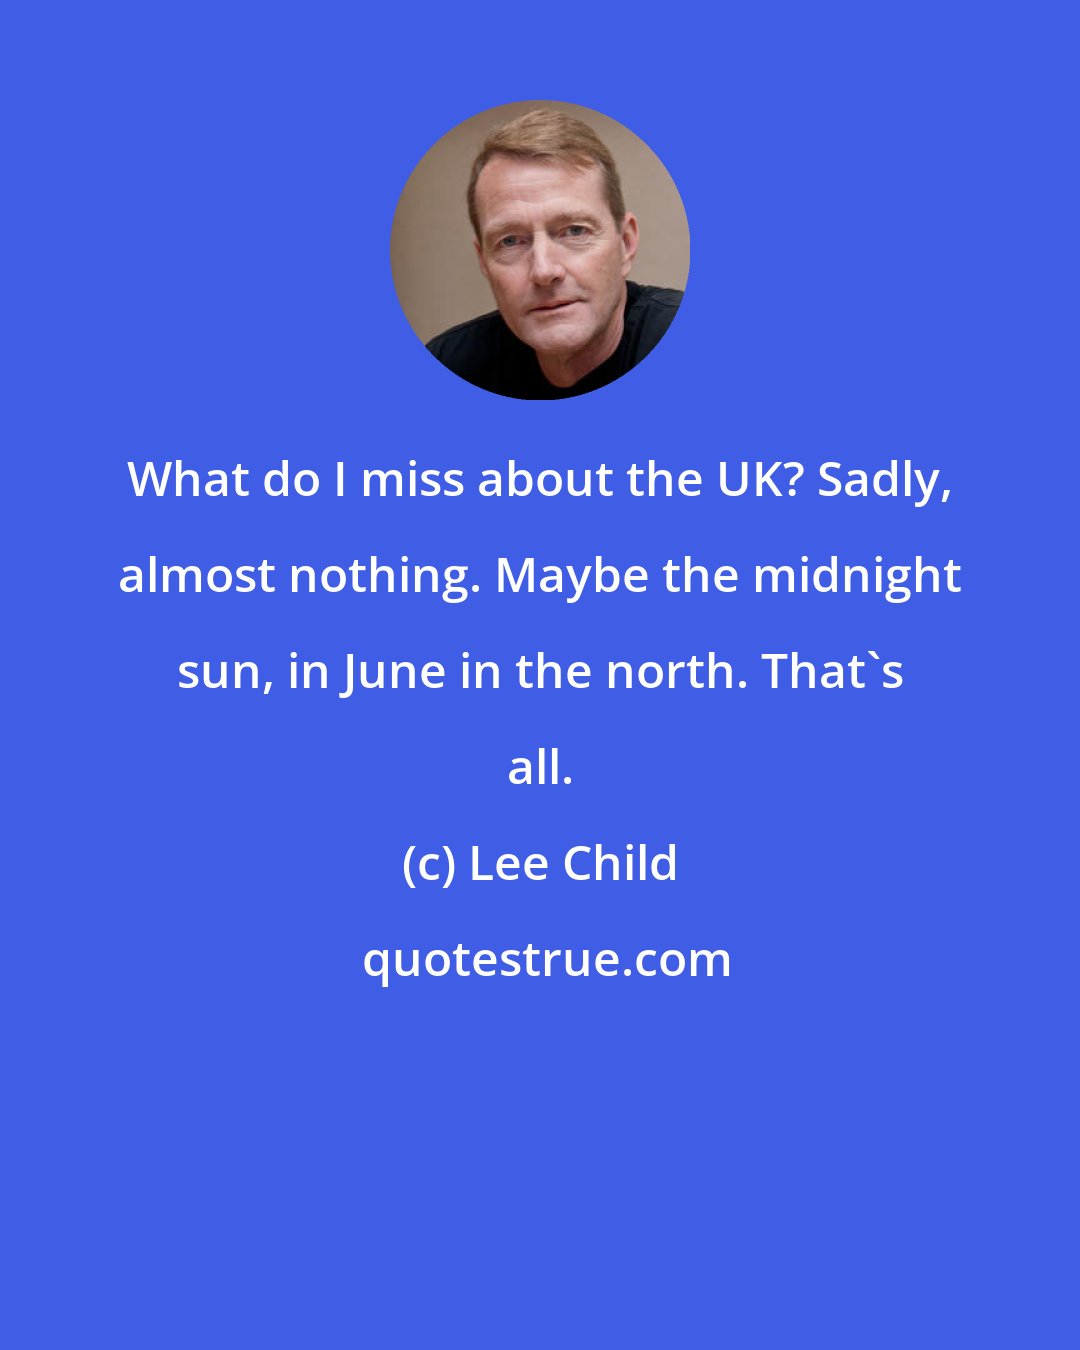 Lee Child: What do I miss about the UK? Sadly, almost nothing. Maybe the midnight sun, in June in the north. That's all.